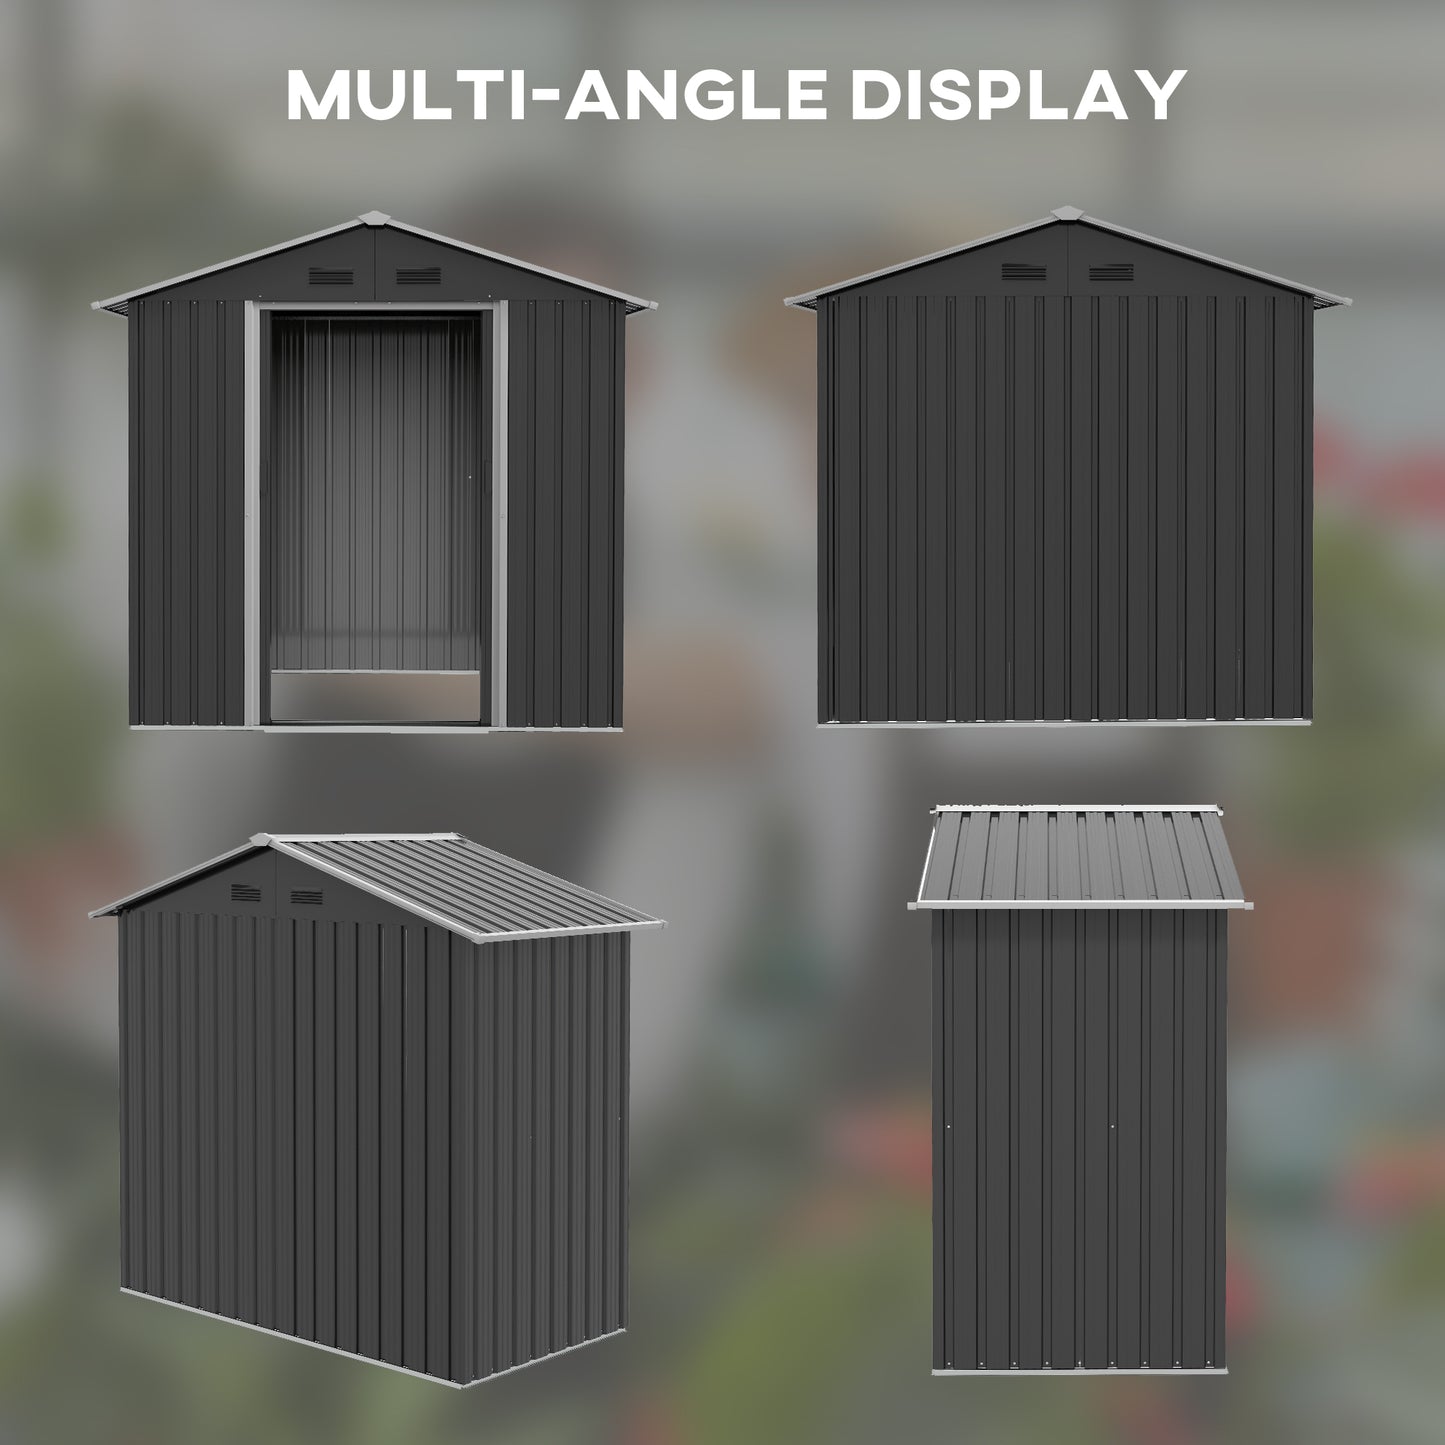 Outsunny 6.5x3.5ft Metal Garden Storage Shed for Outdoor Tool Storage with Double Sliding Doors and 4 Vents Dark Grey